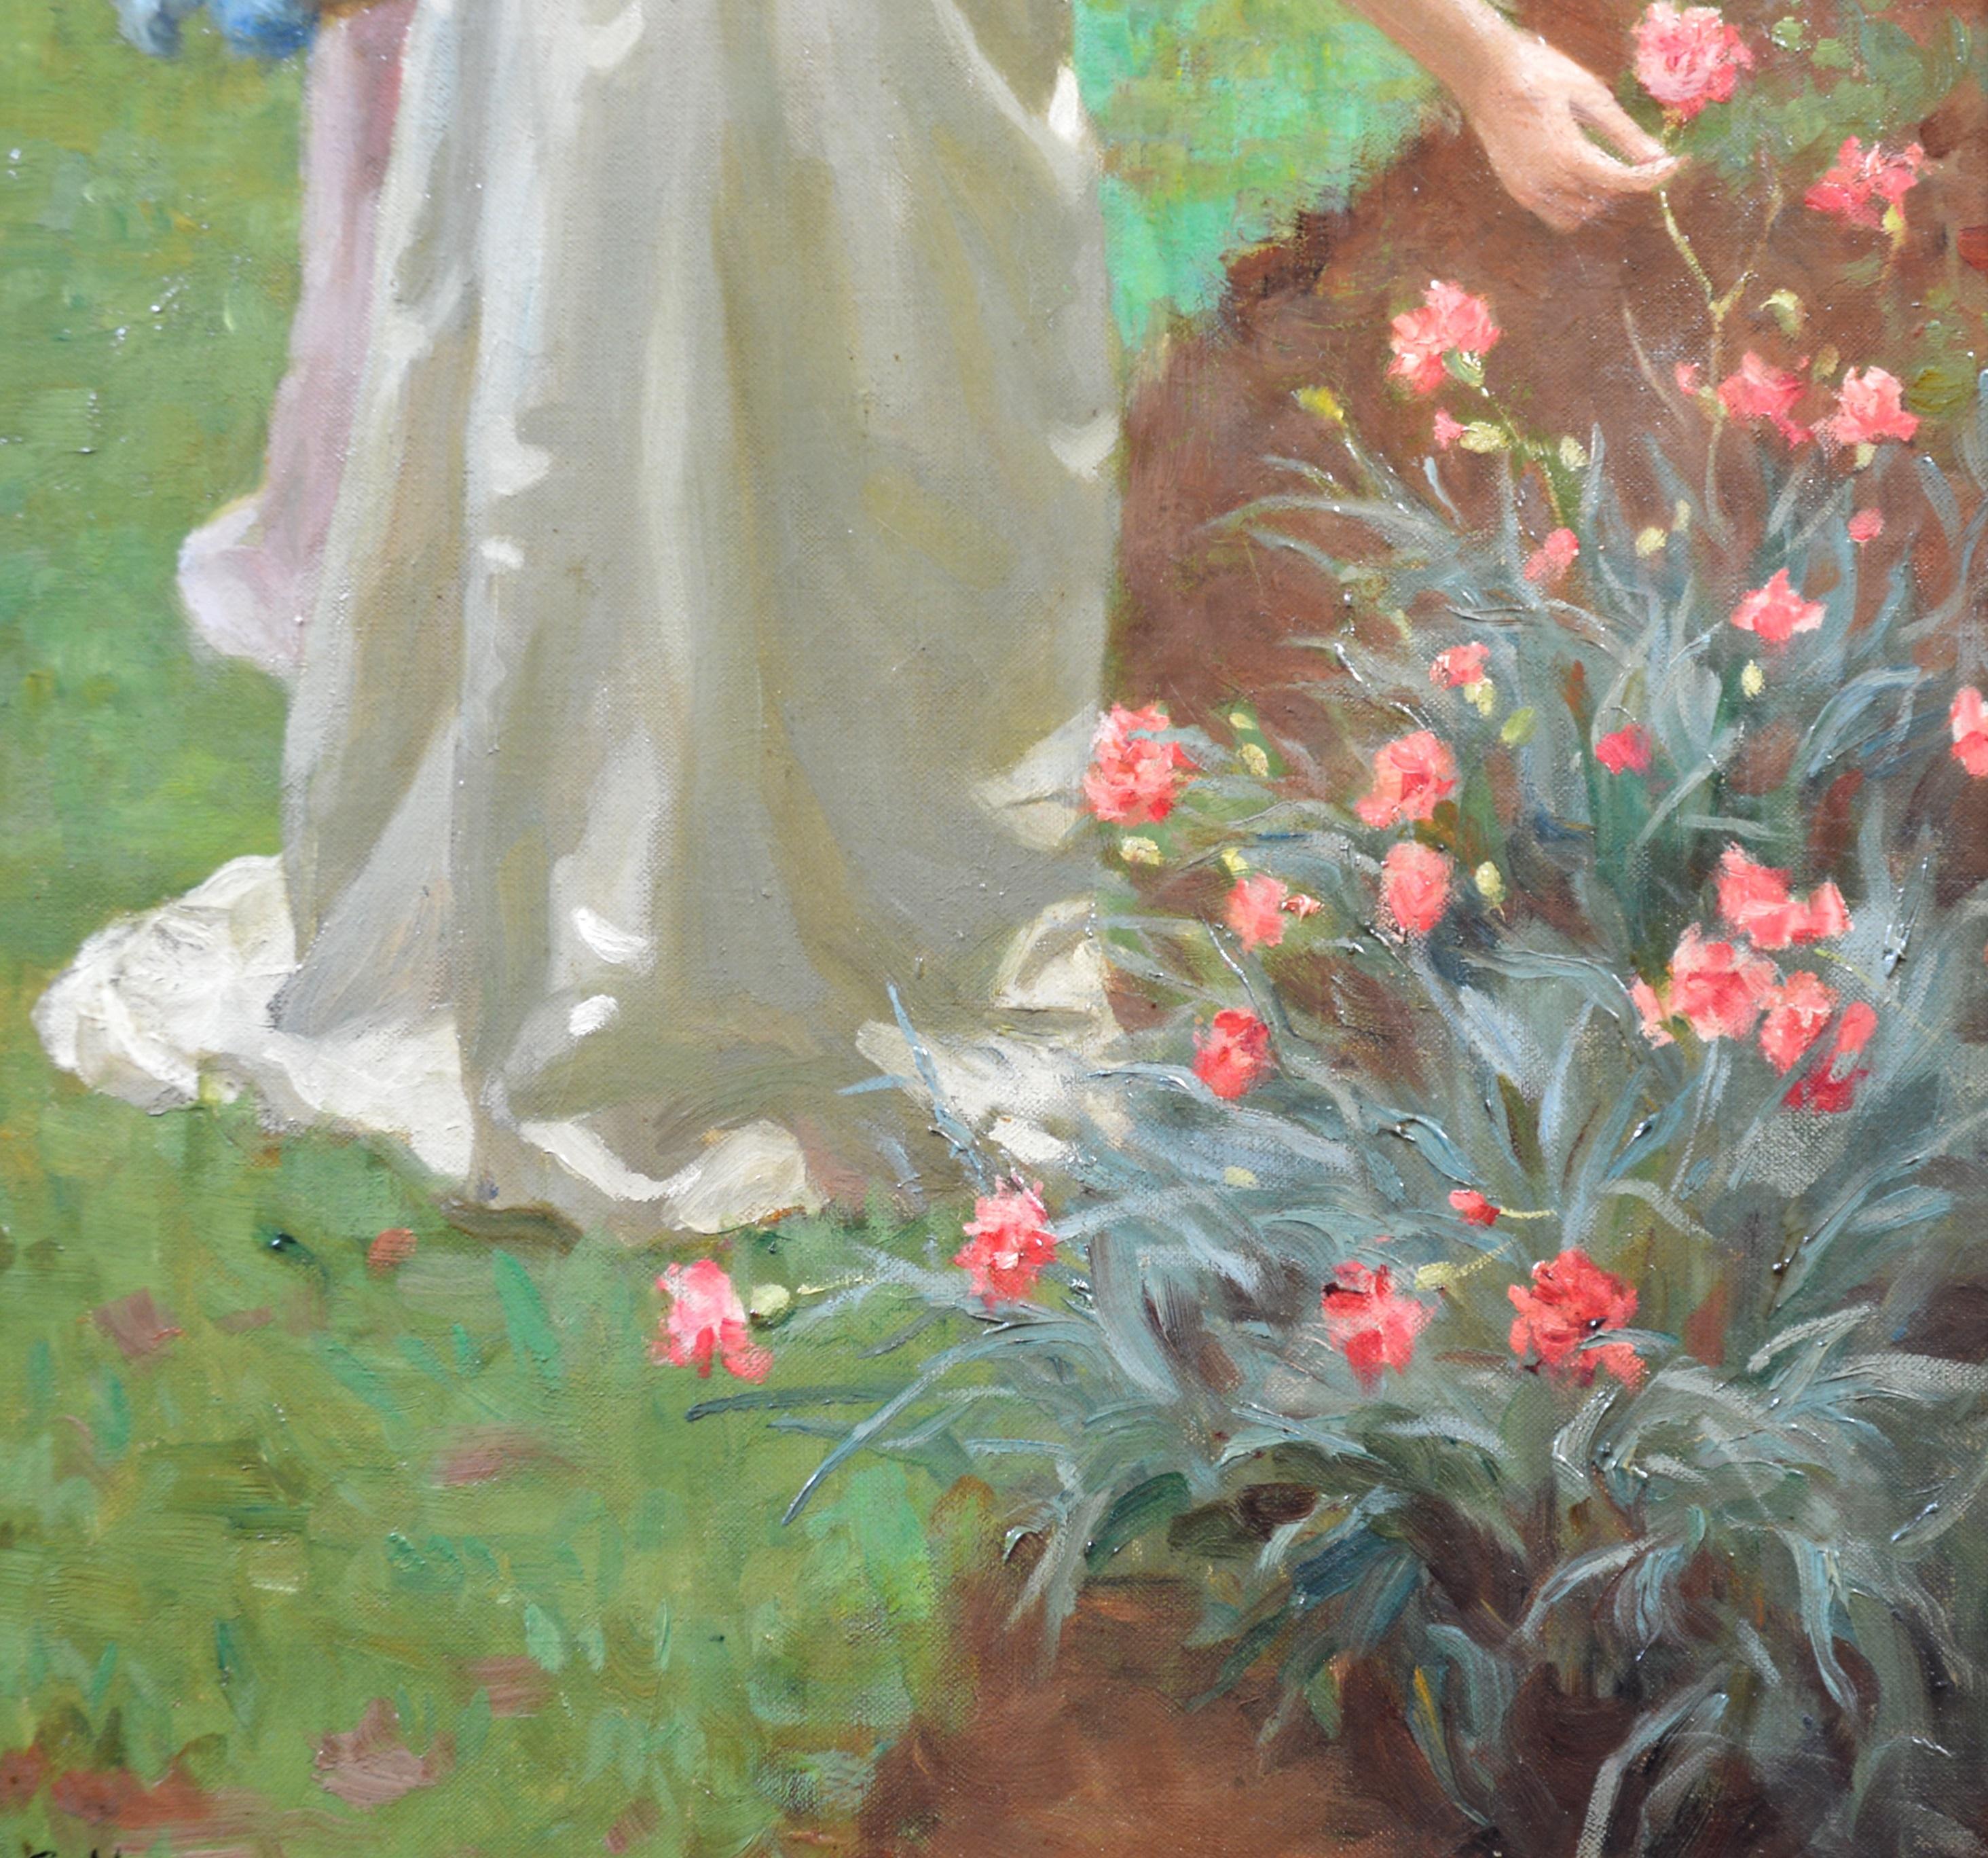 ‘Picking Flowers for a Posy’ by Charles Haigh-Wood (1856-1927). 

The painting – which depicts two young ladies in an English garden in summertime – is signed by the artist and presented in a fine quality, bespoke gold metal leaf frame.

All our